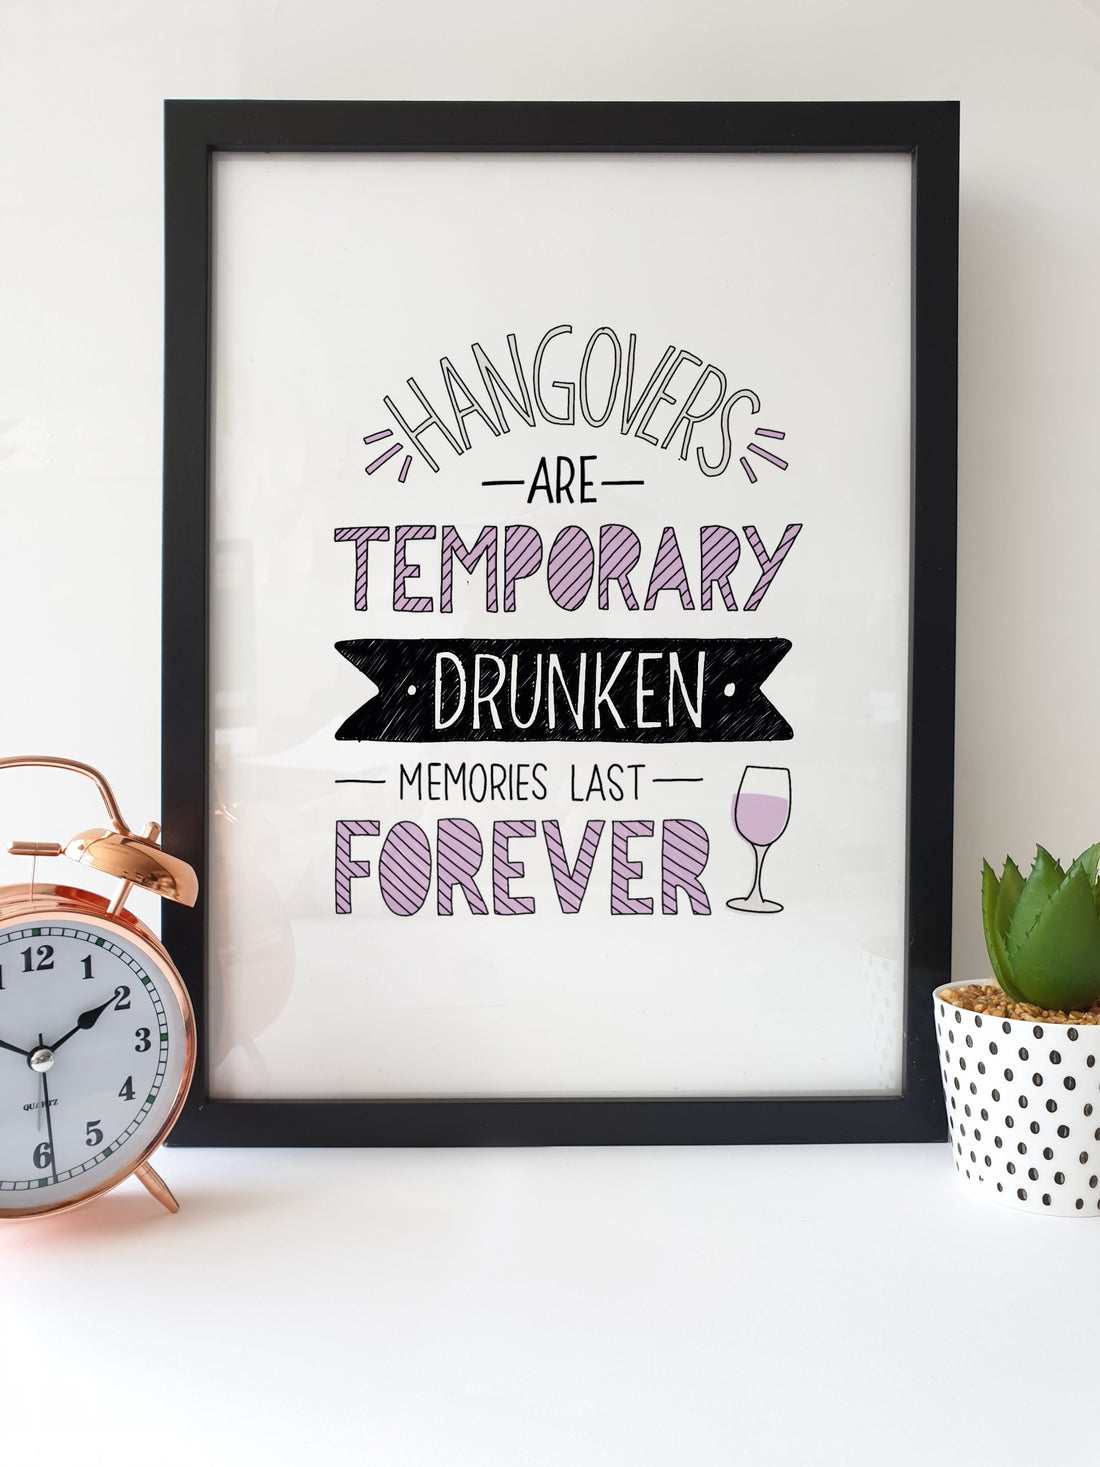 Print Reads:   Hangovers are temporary  Drunken memories last forever  FREE UK DELIVERY Choose A3 or A4 size print (will fit any standard A3 or A4 frame respectively).  Product is print only - the framed print in our image is for illustrative purposes only.